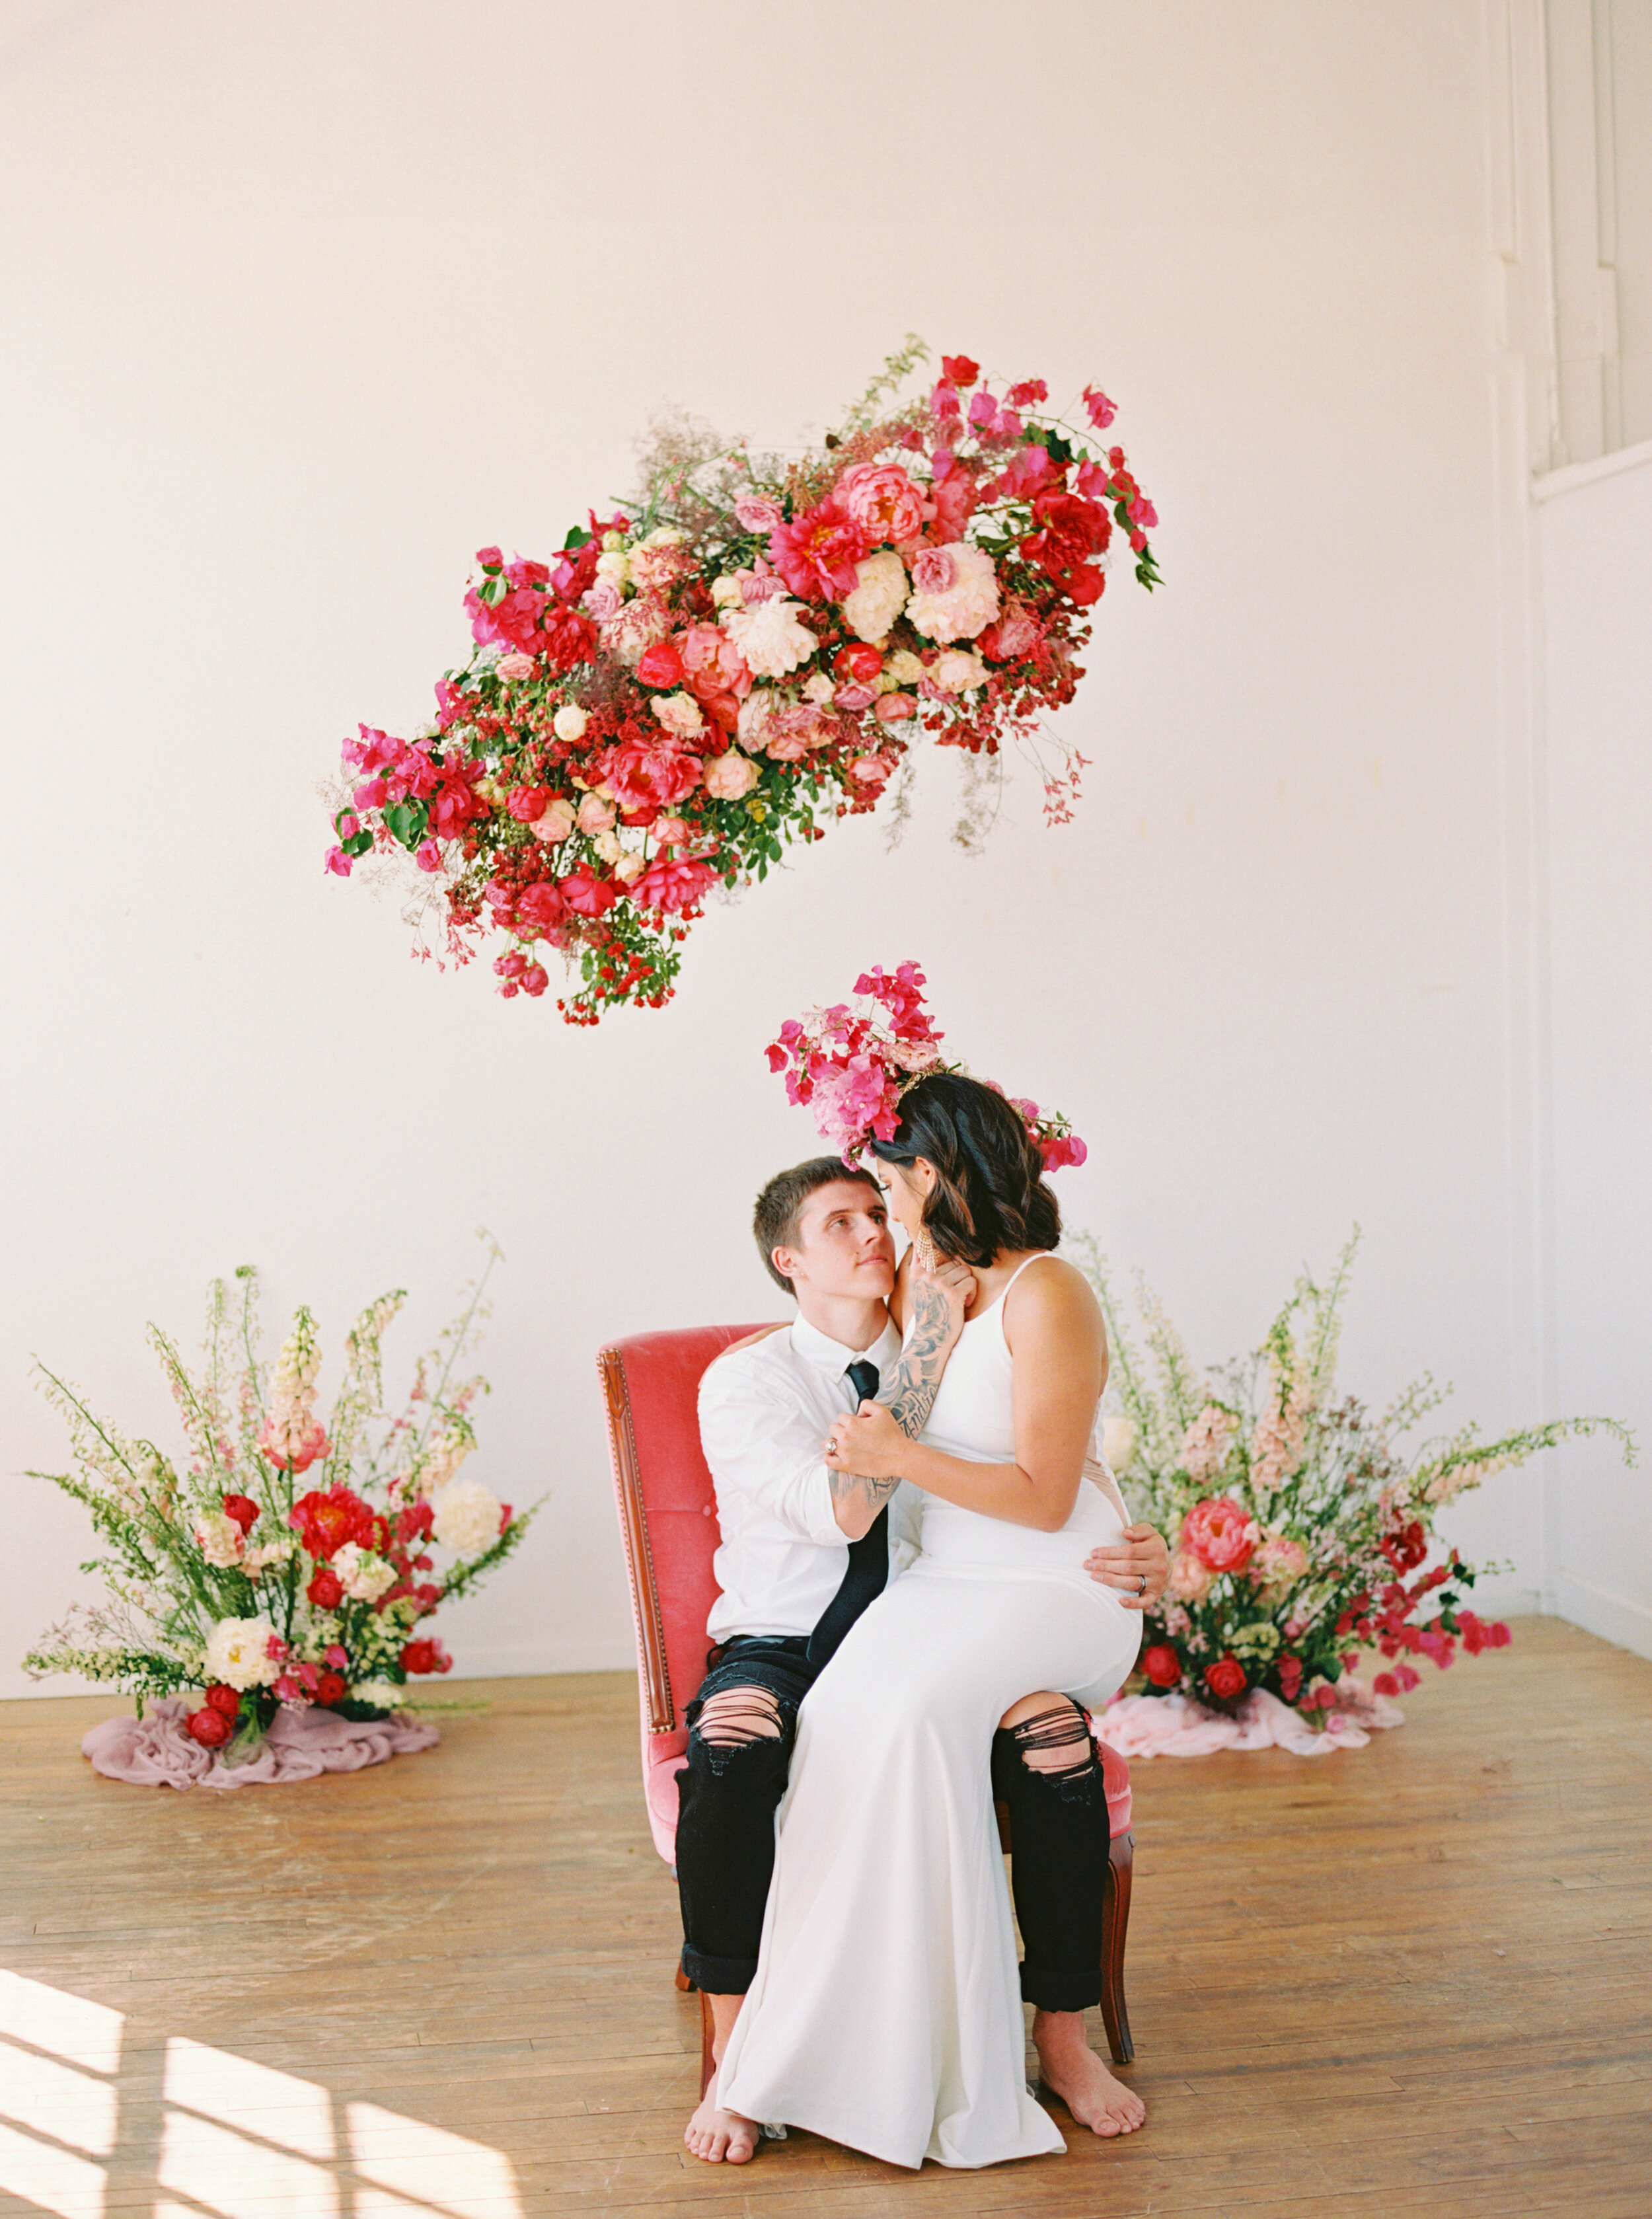 A Romantic Wedding Elopement Filled with Colorful Fuchsia - Sarahi Hadden Submission-112.jpg